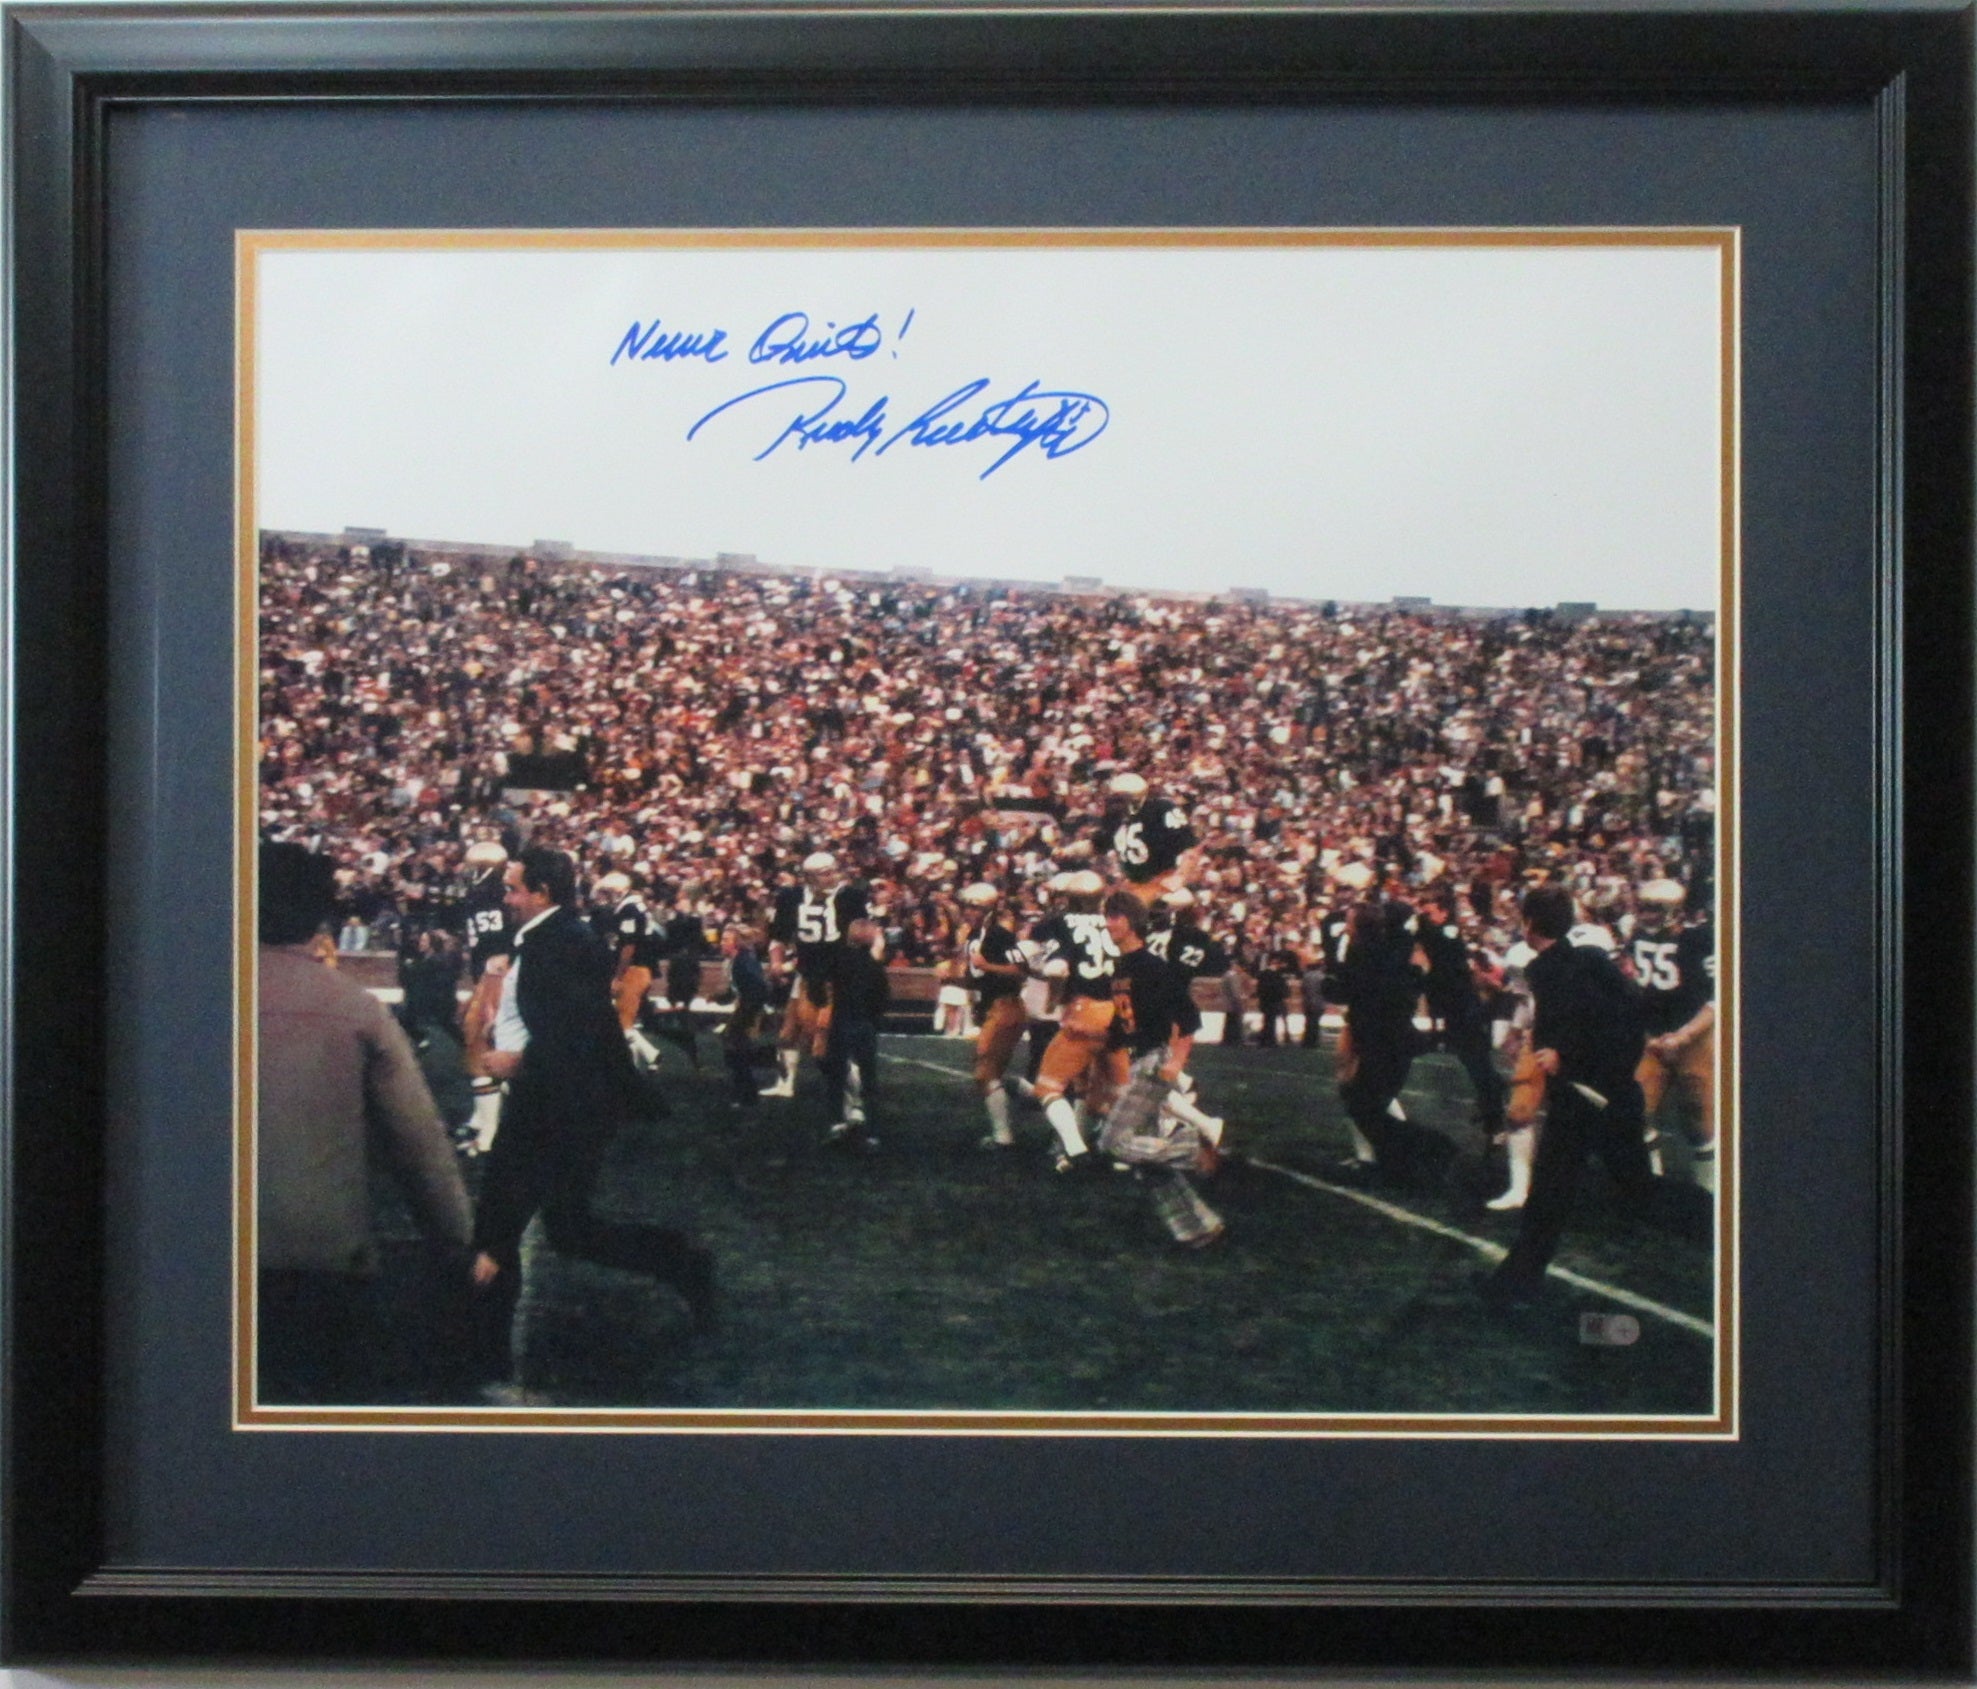 Rudy Ruettiger Notre Dame Autographed 16x20 "Never Quit" Photo Framed